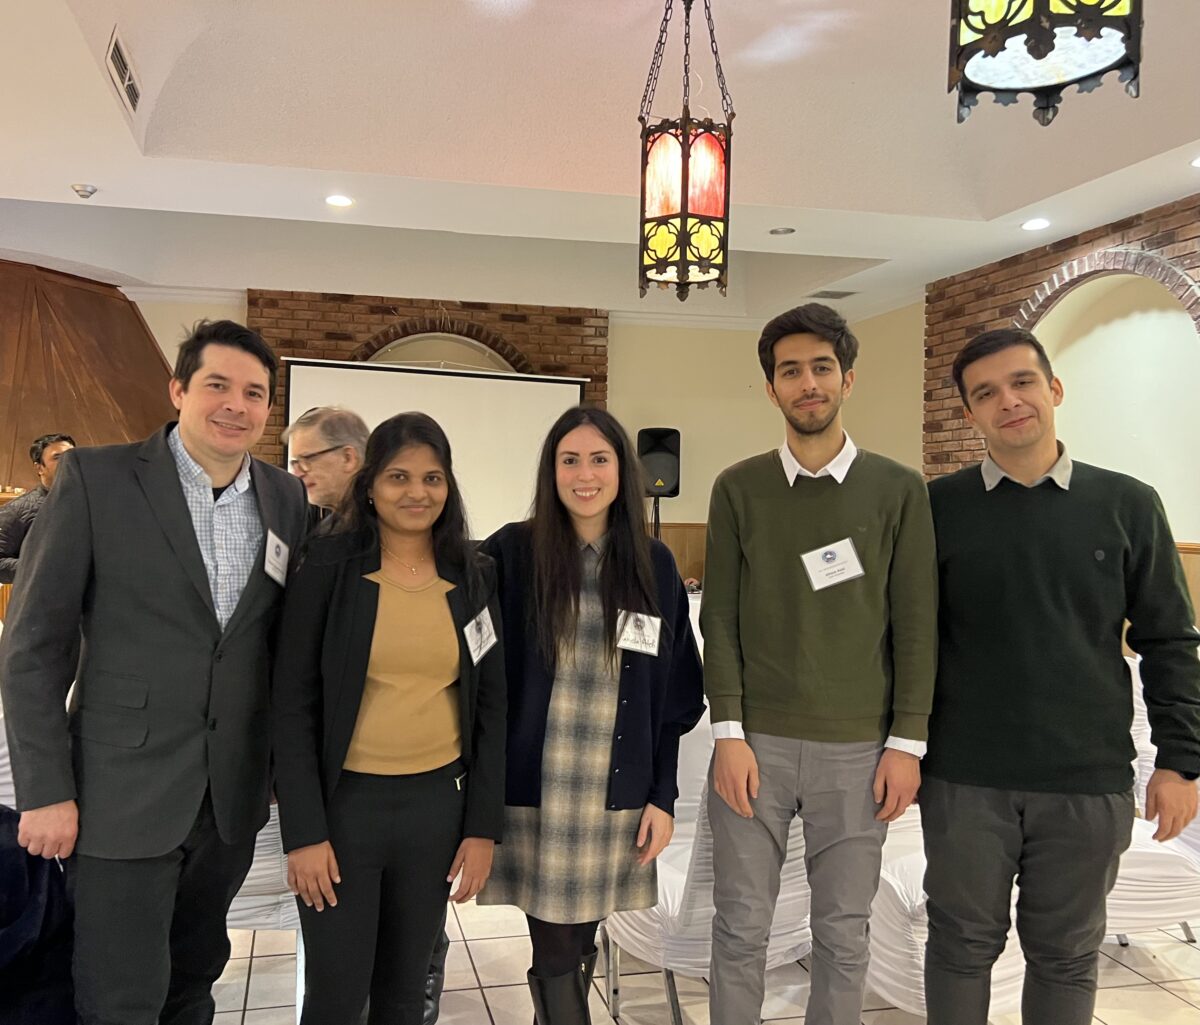 Professor Kamelia Atefi-Monfared with her current students at a conference event